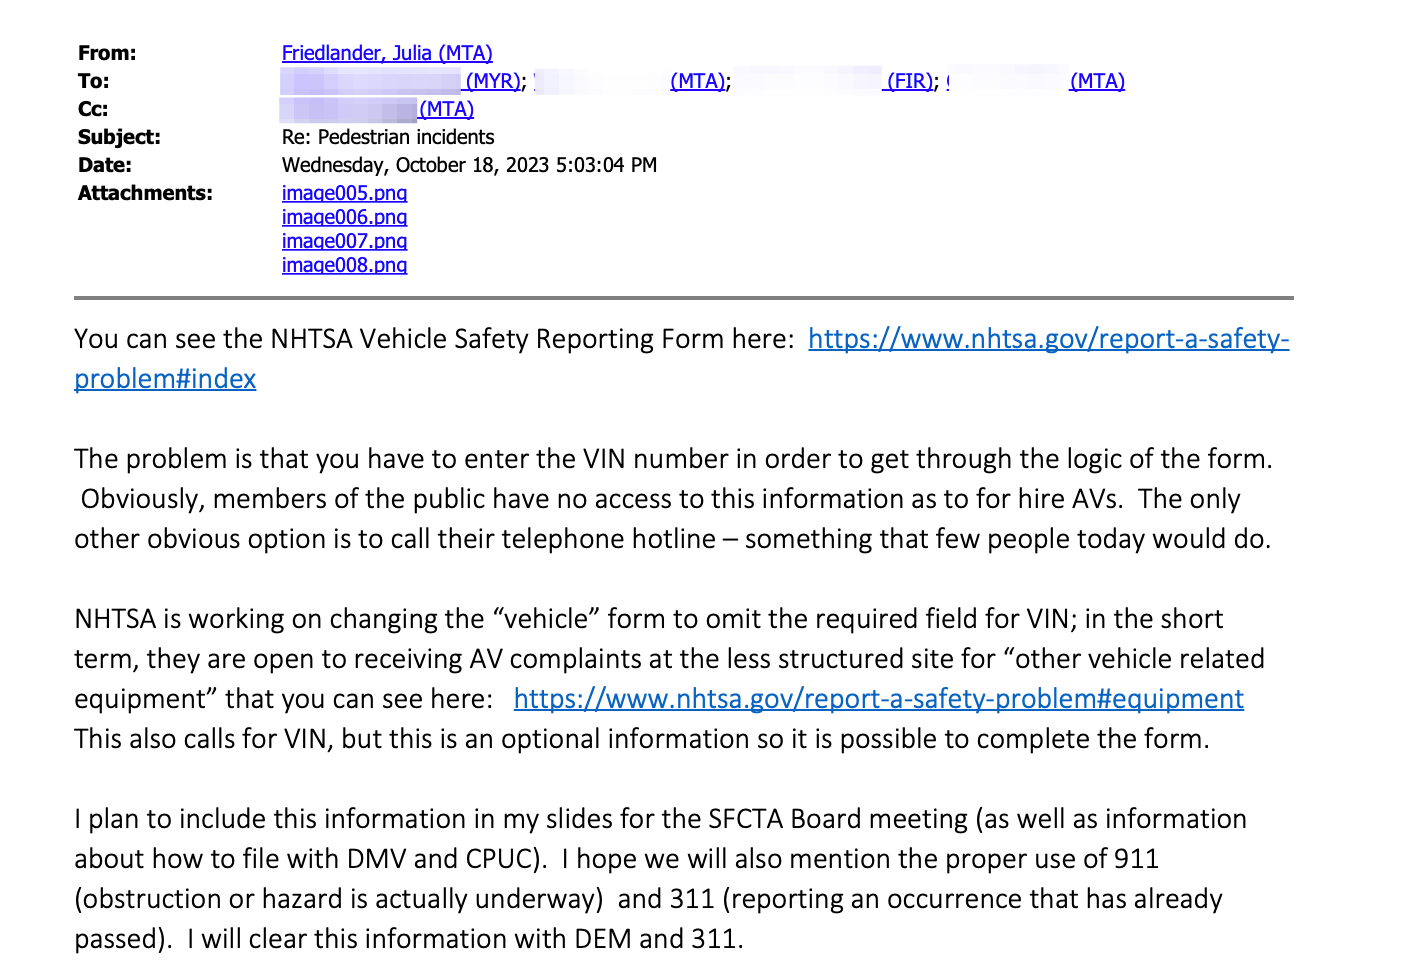 Image of an email that reads: “The problem is that you have to enter the VIN number in order to get through the logic of the form,” Julia Friedlander, senior manager of automated driving policy at San Francisco’s Municipal Transportation Agency, told her colleagues in an email titled "Pedestrian Incidents" obtained by 404 Media. “Obviously, members of the public have no access to this information as to for-hire AVs. The only other obvious option is to call their telephone hotline—something few people today would do.” VIN numbers are unique to each car and are generally printed inside the door frame of any given car.